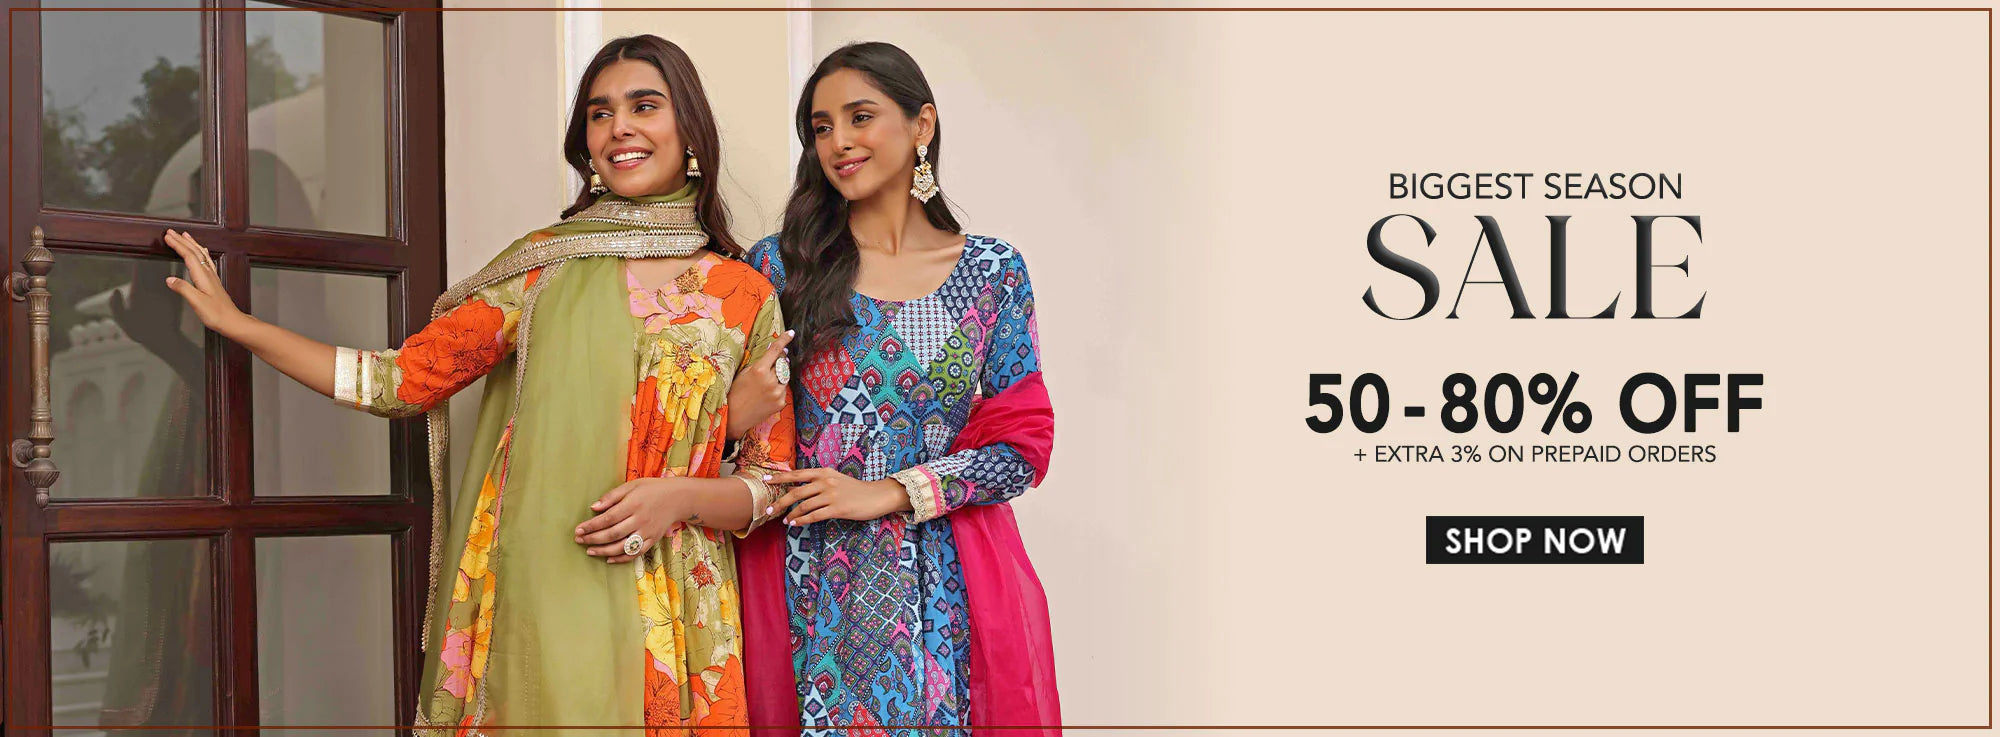 Shop Women's Clothing at Janasya | Up to 60% Off - Limited Time Offer ...